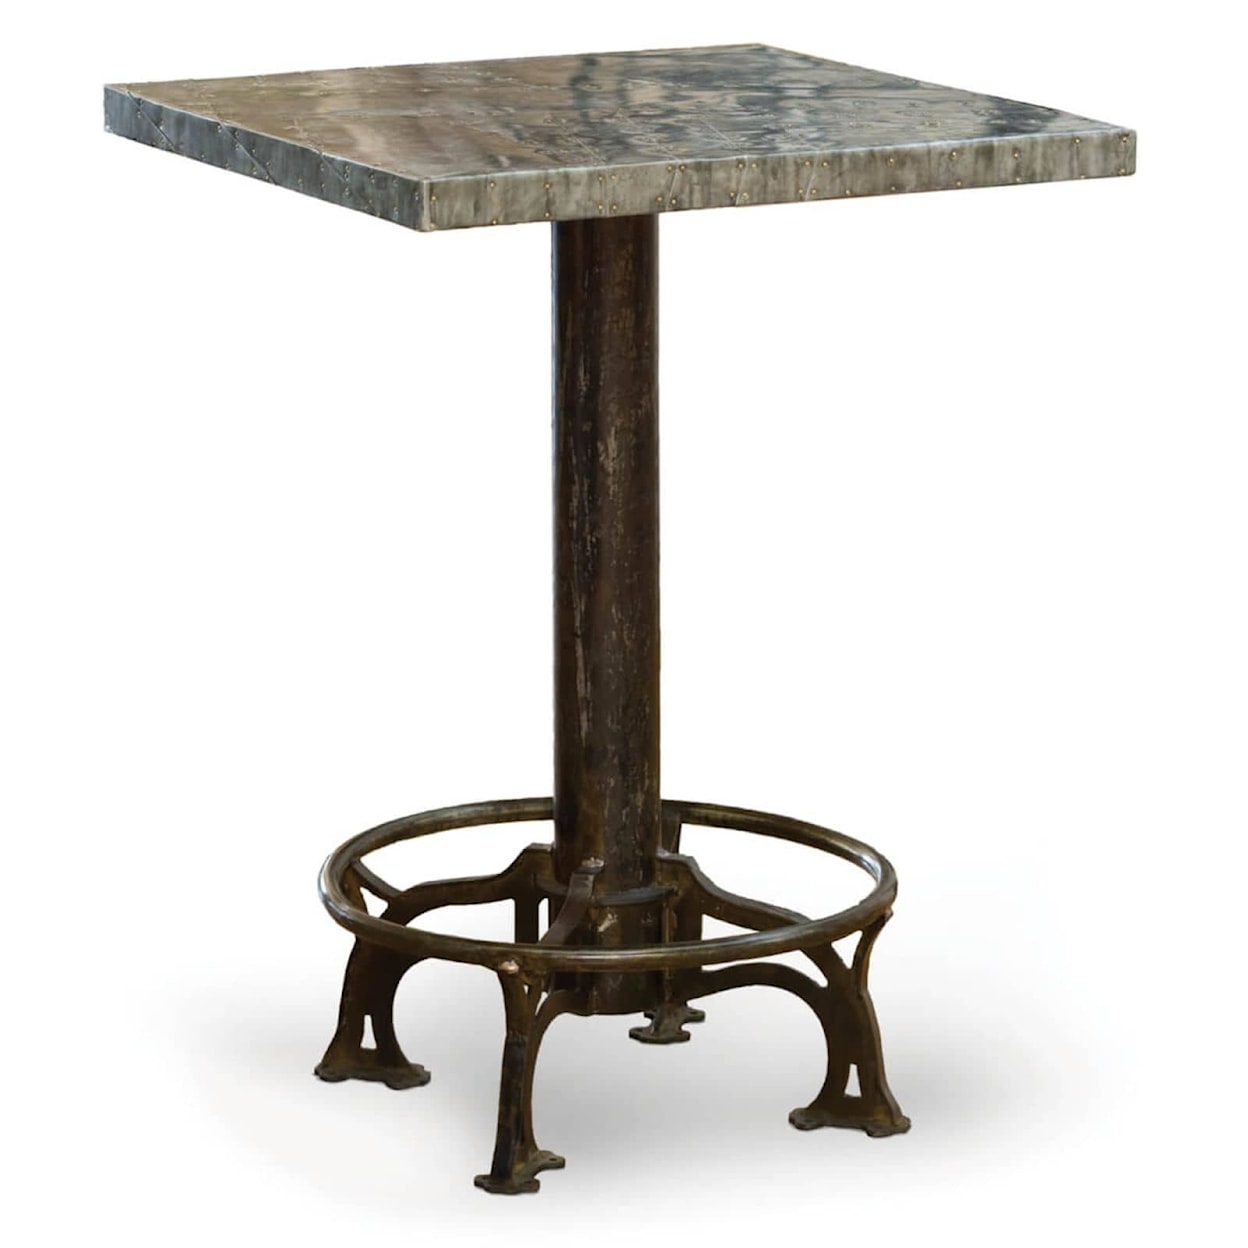 Regina-Andrew Design Regina-Andrew Design Zinc Cafe Table with Frankenstein Top